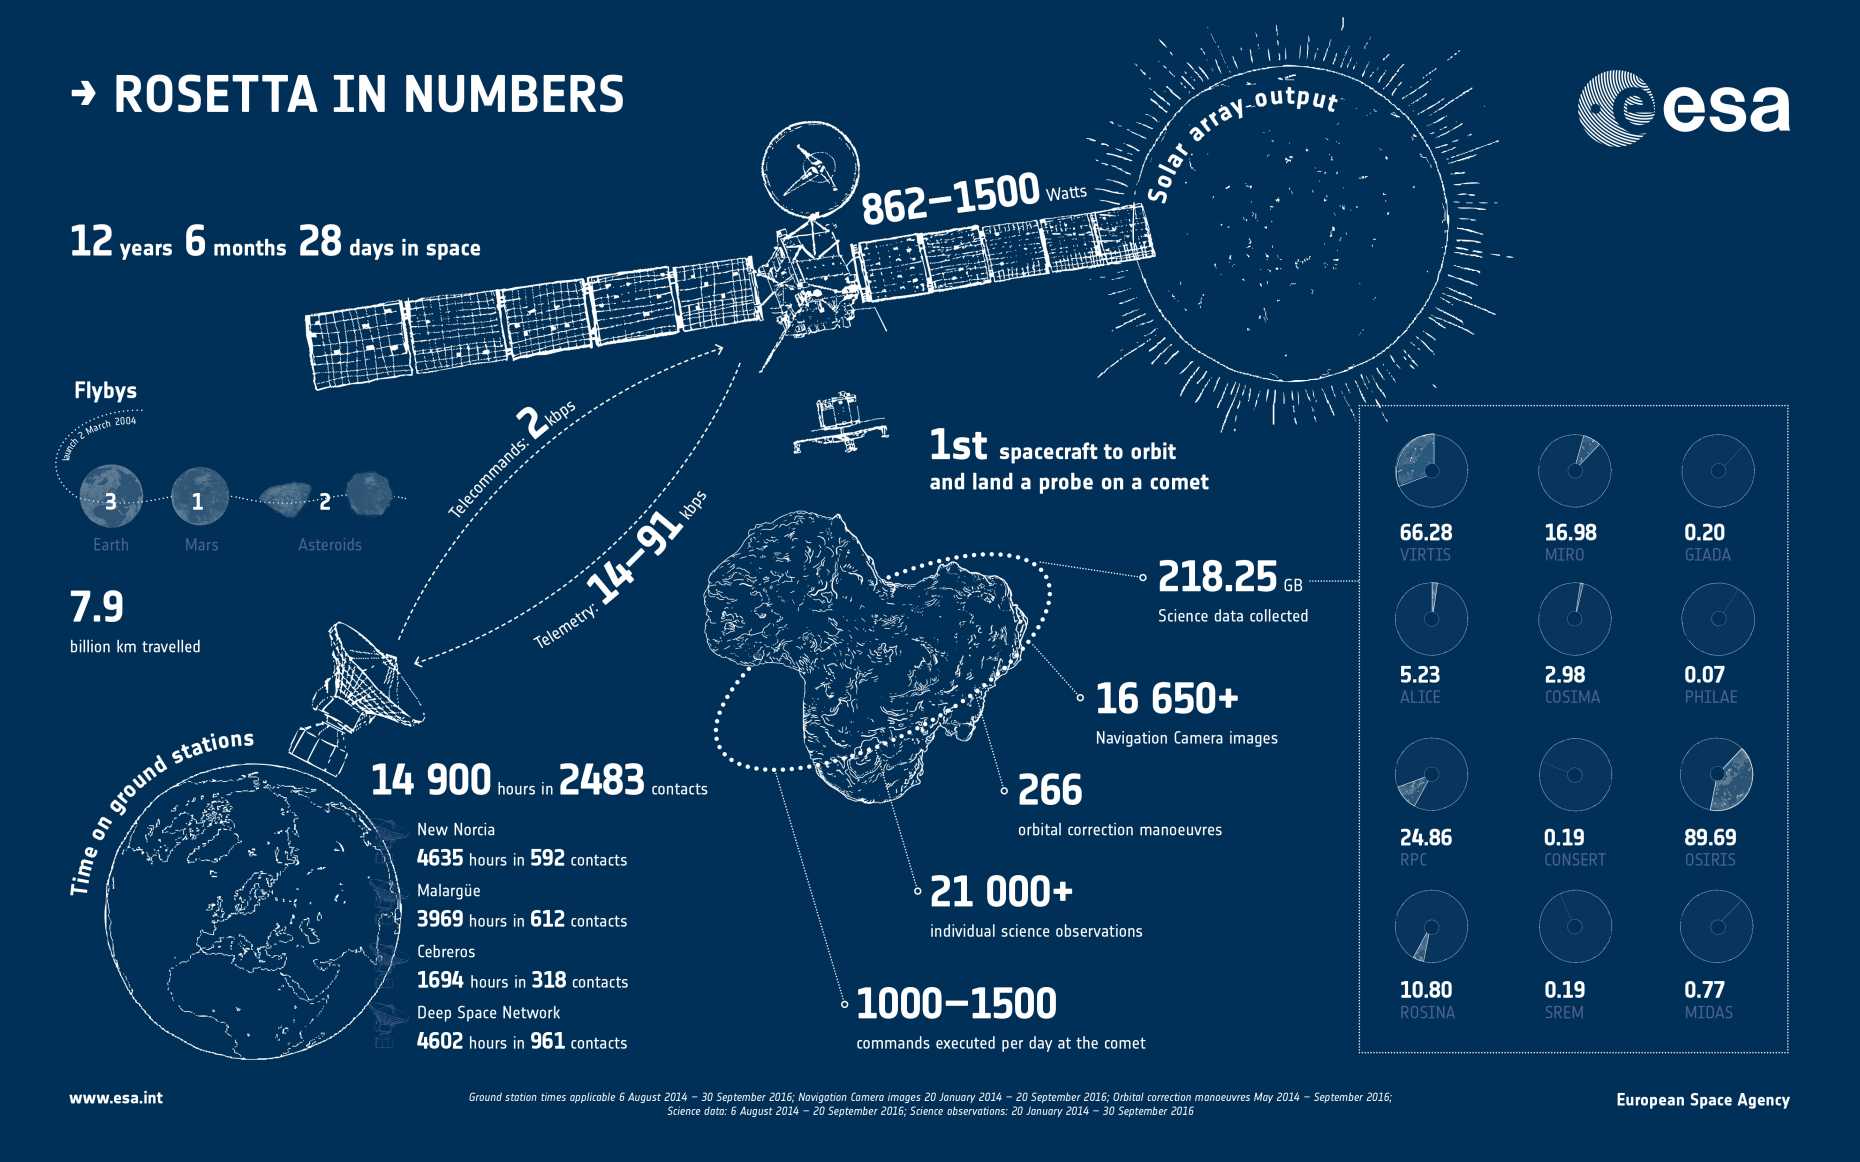 Enlarged view: Rosetta in numbers infographic